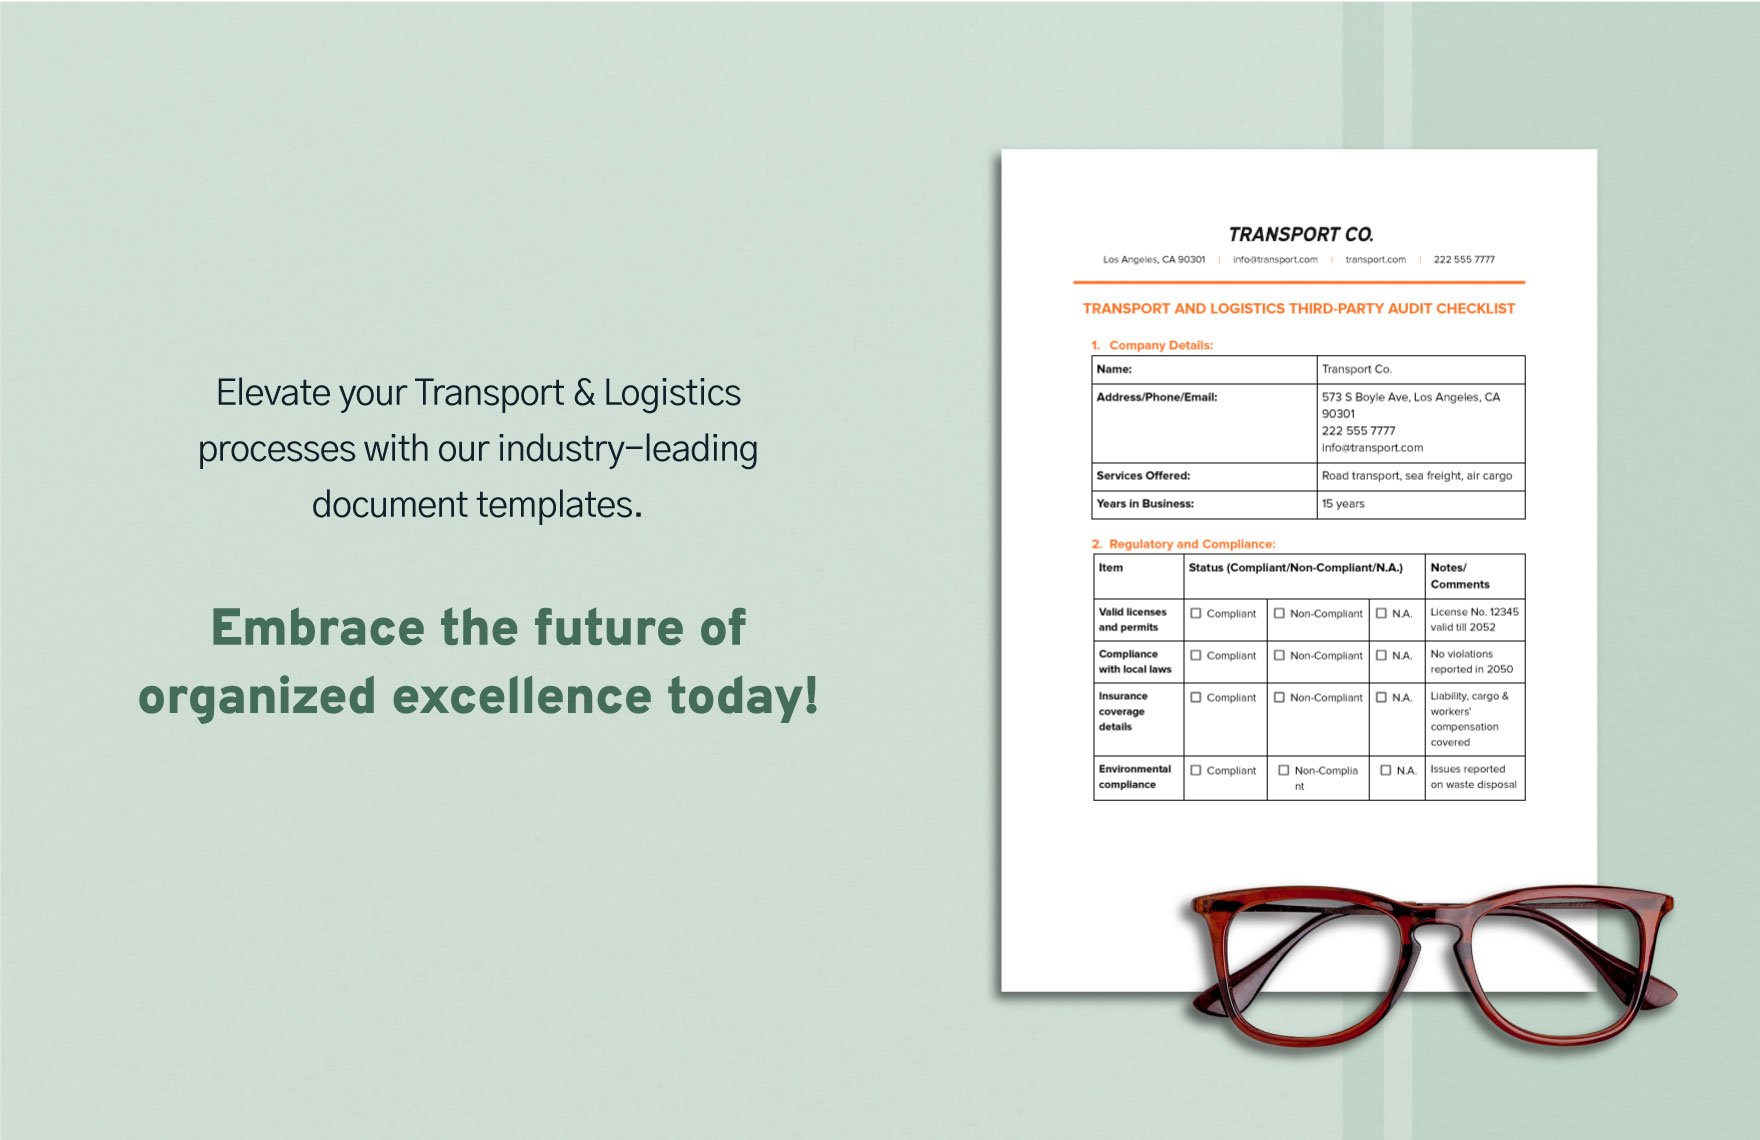 Transport and Logistics Third-Party Audit Checklist Template